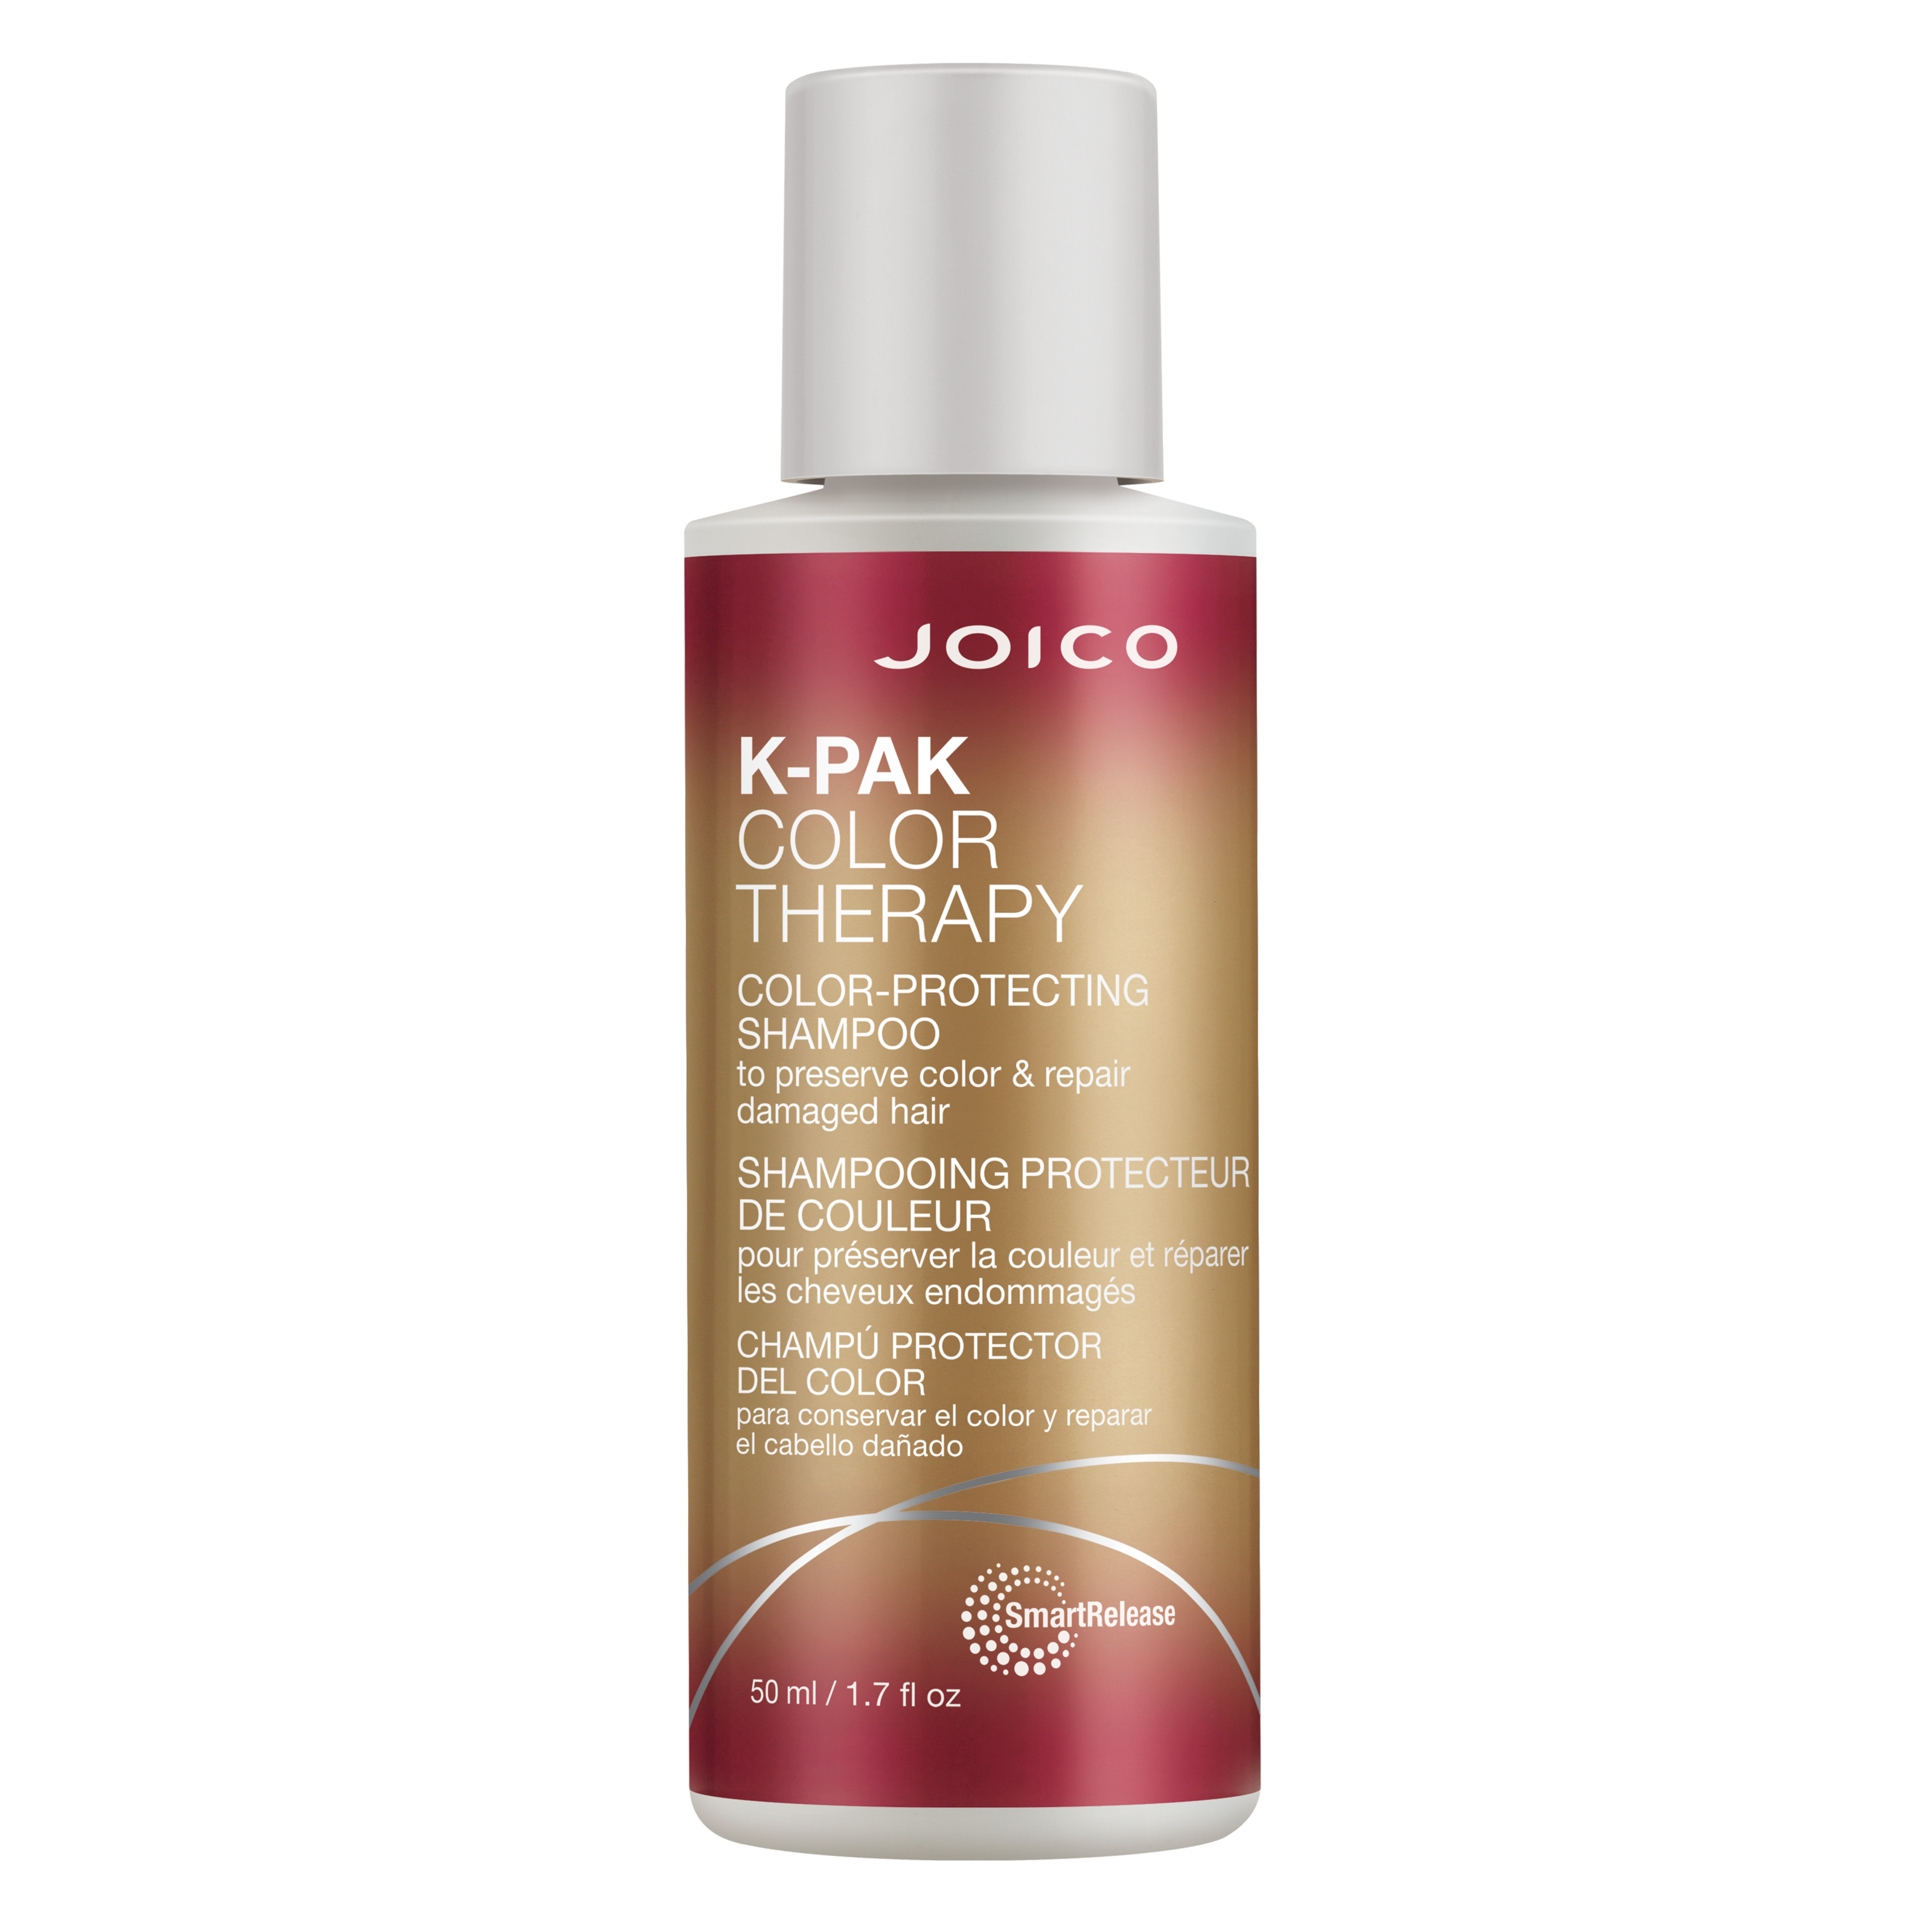 Läs mer om Joico K-pak Color Therapy Color-Protecting Shampoo 50 ml